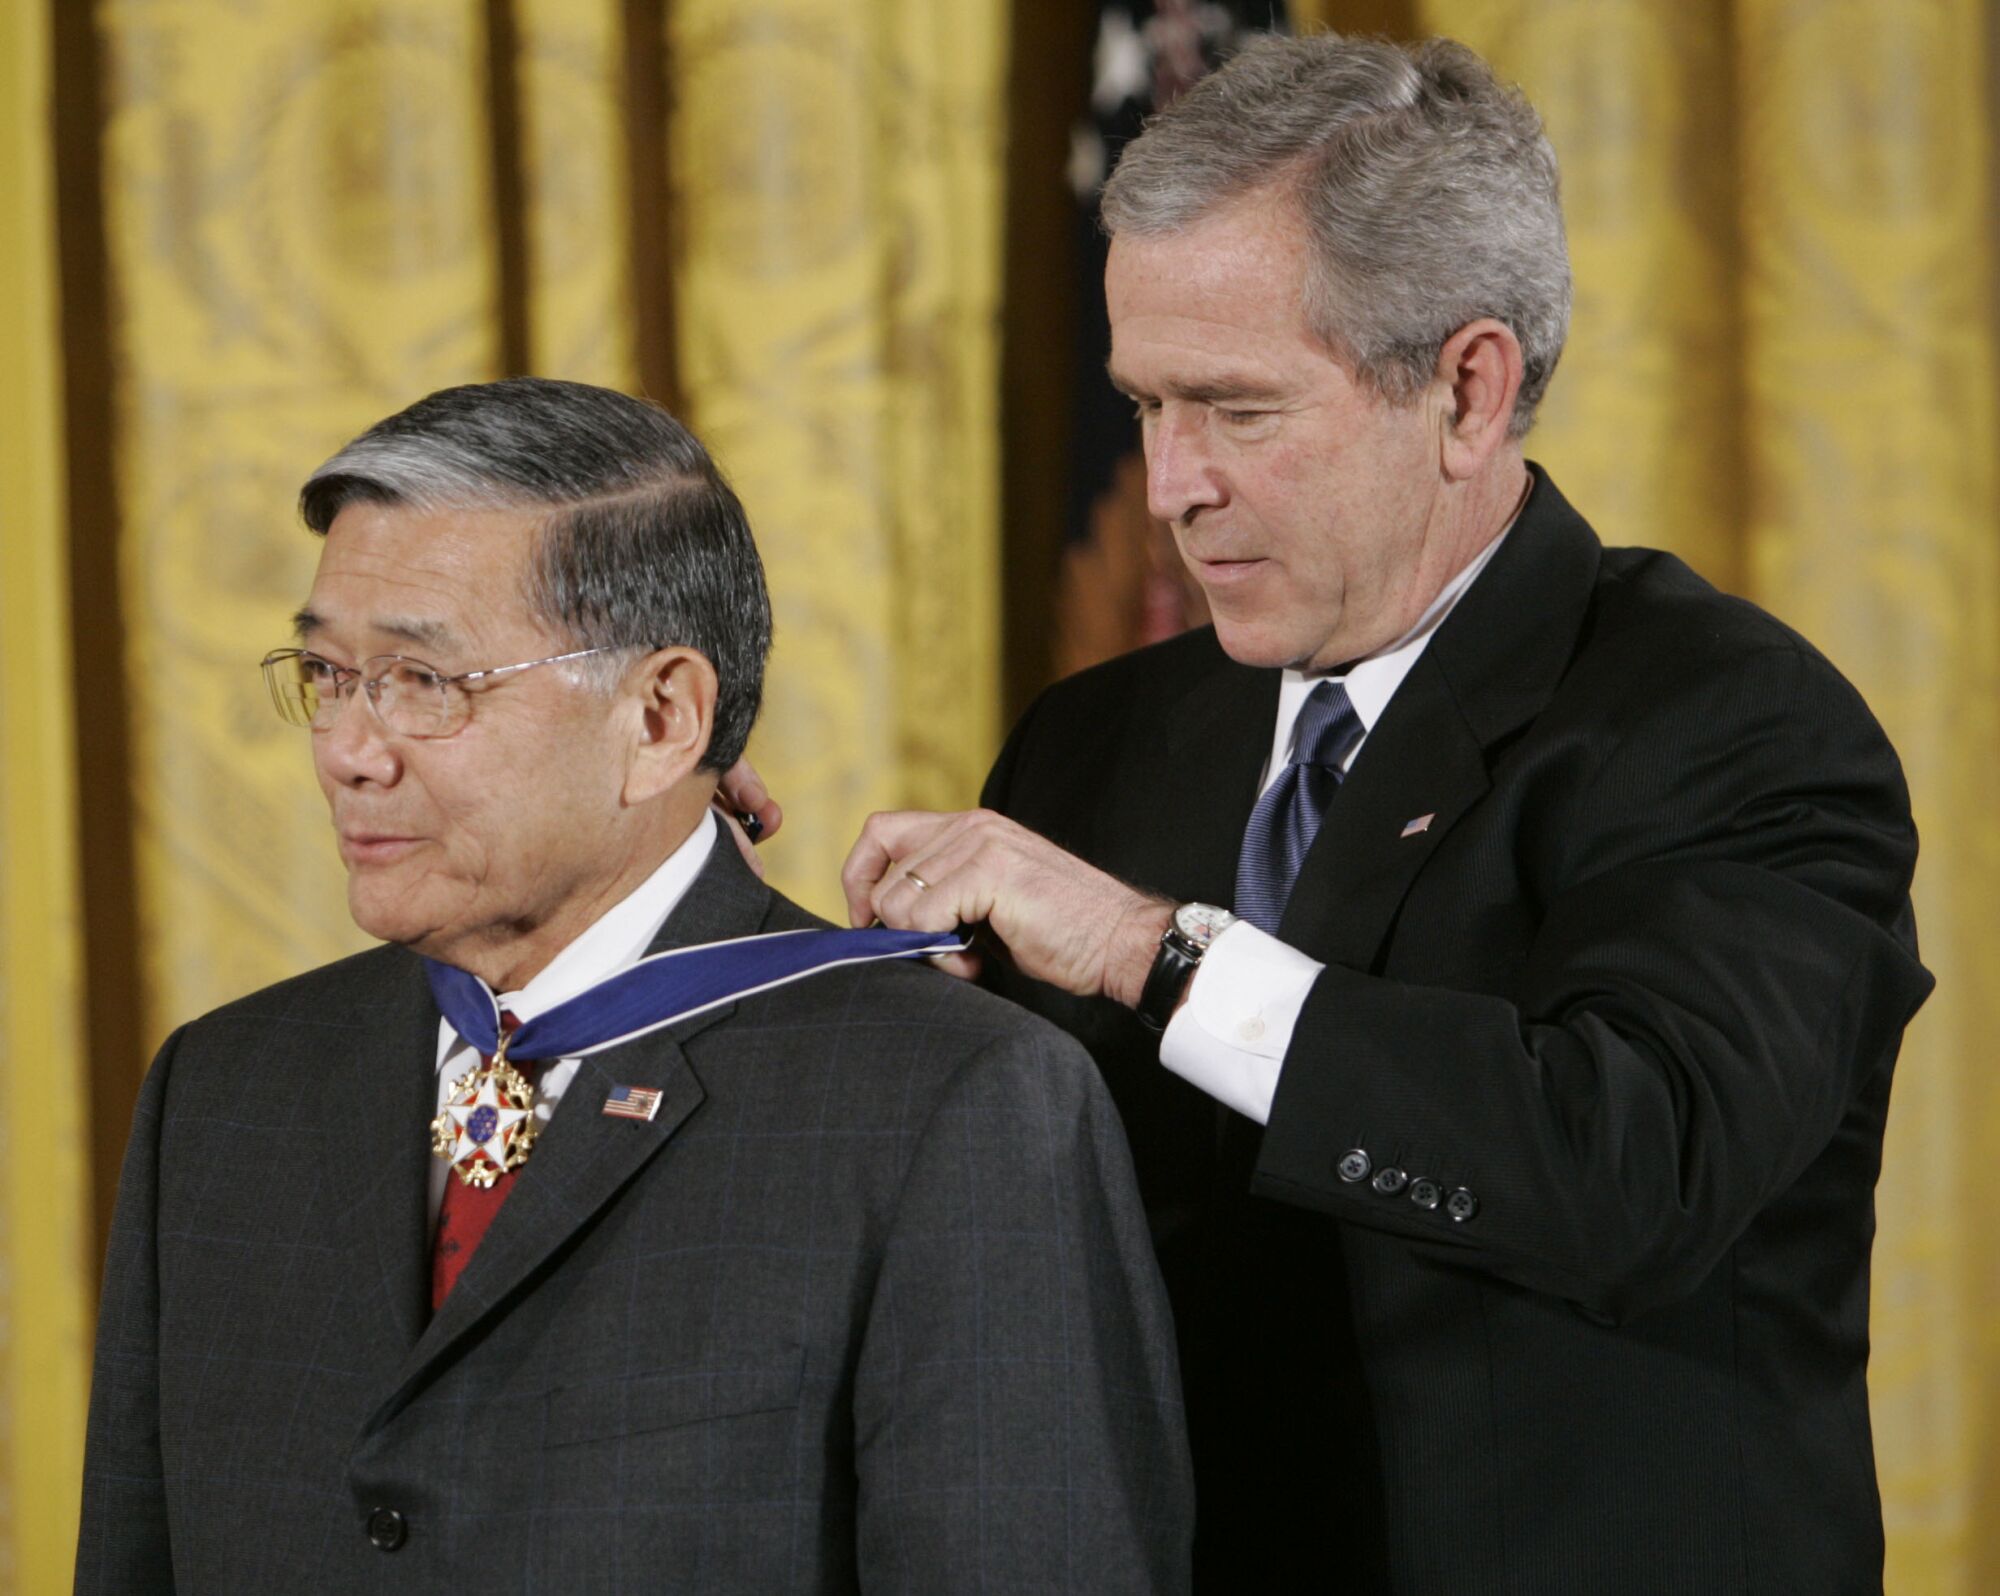 Then-President George W. Bush (right) presents Norman Mineta with the Presidential Medal of Freedom.